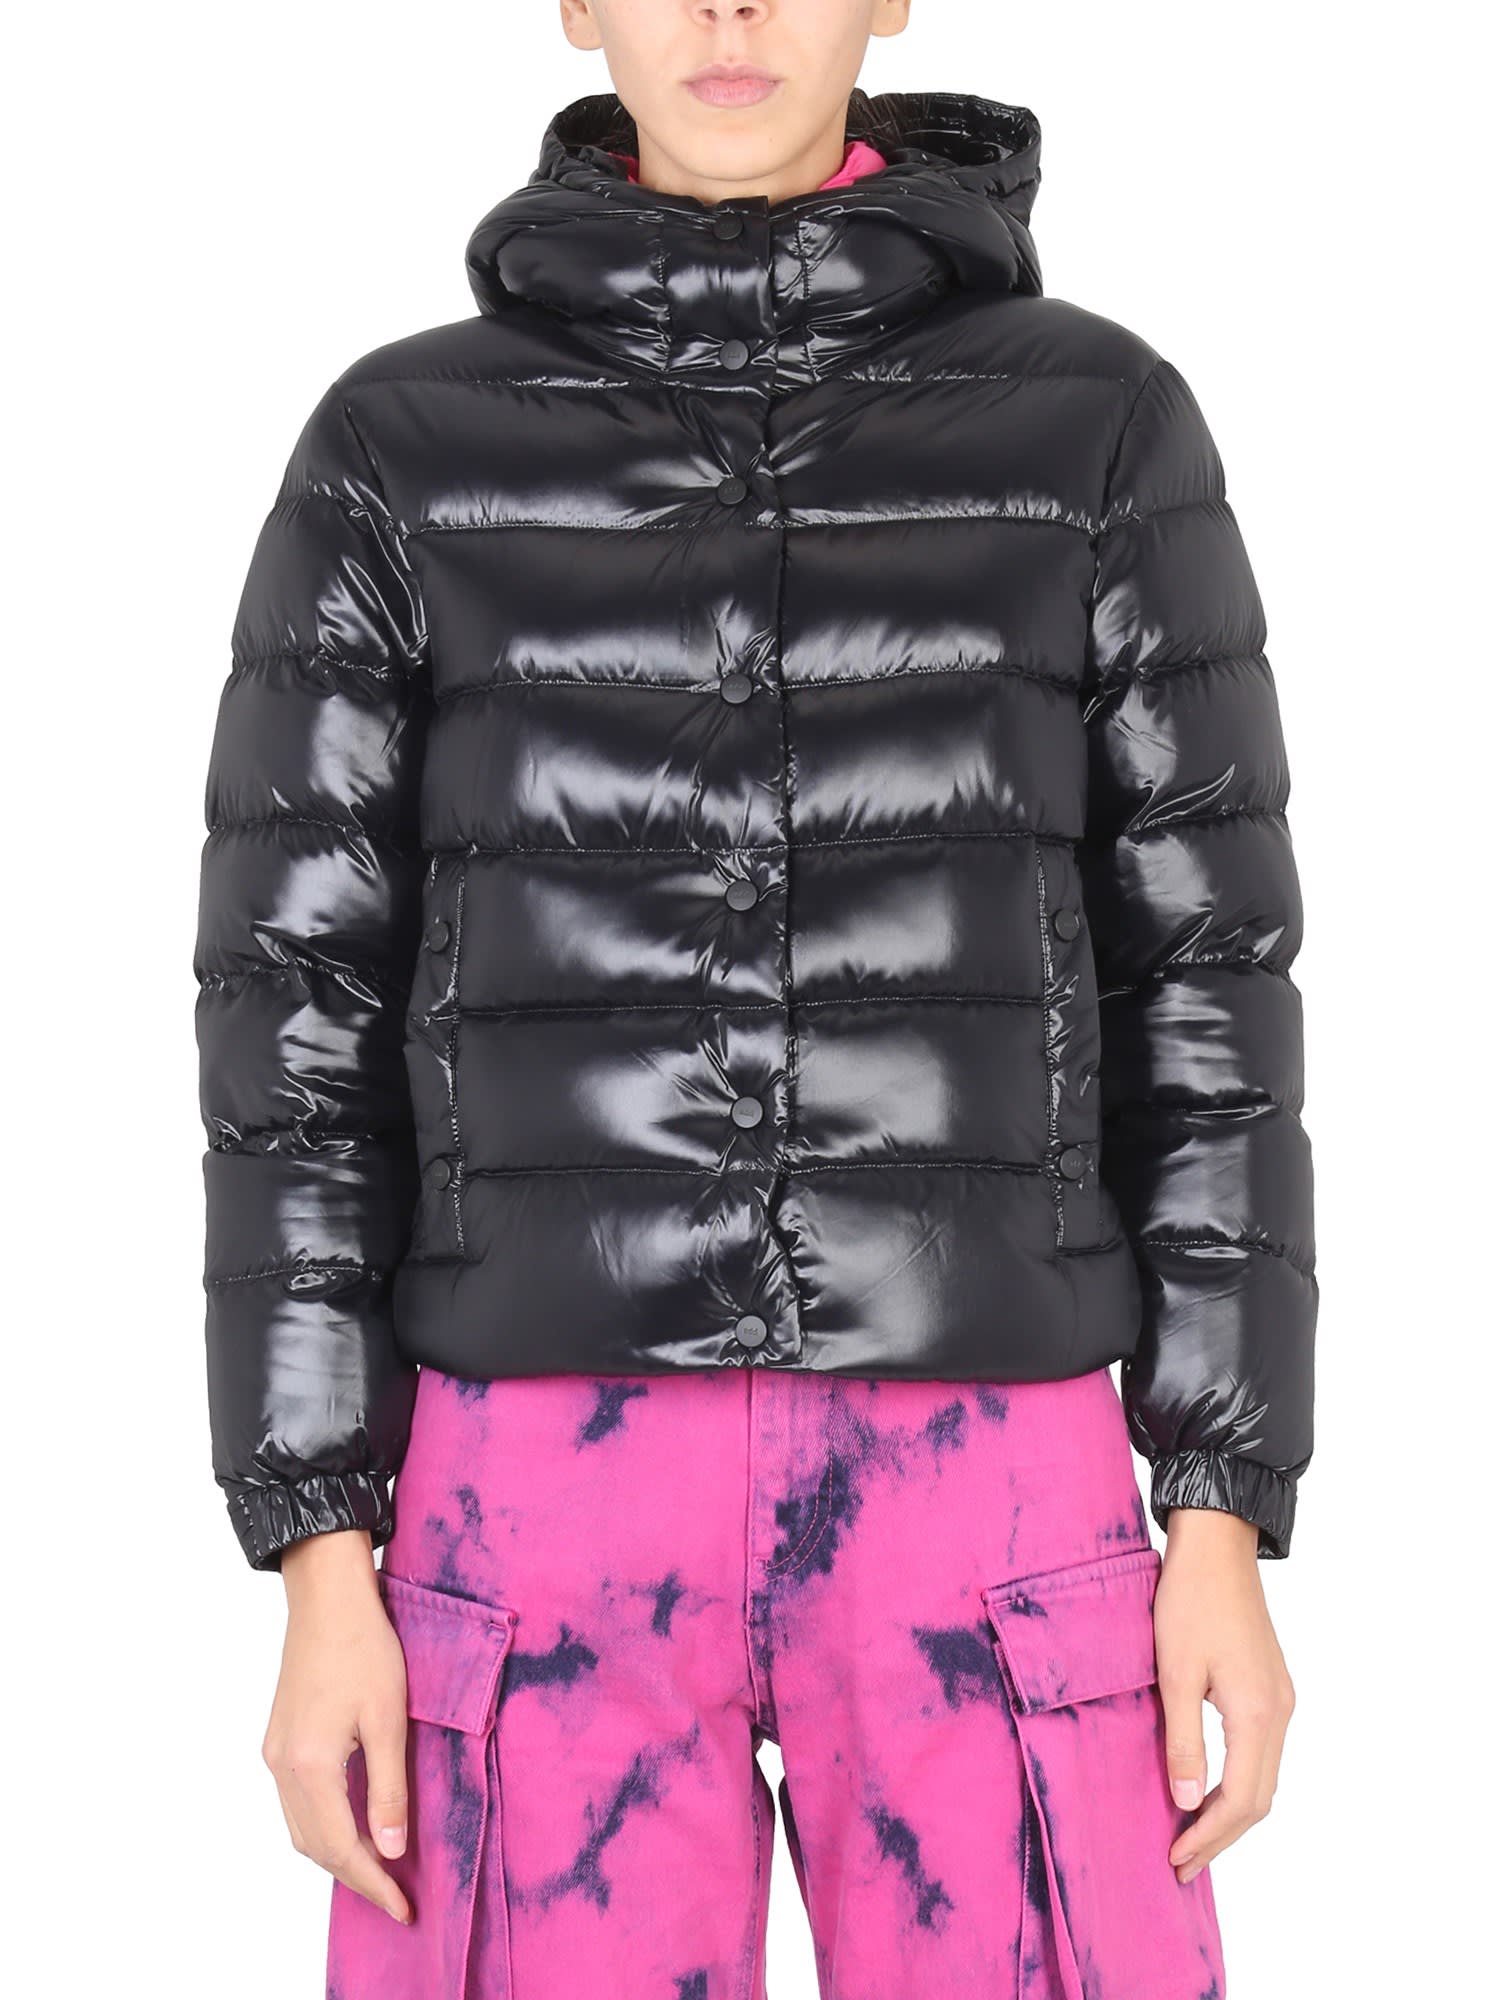 Add Down Jacket With Hood In Black